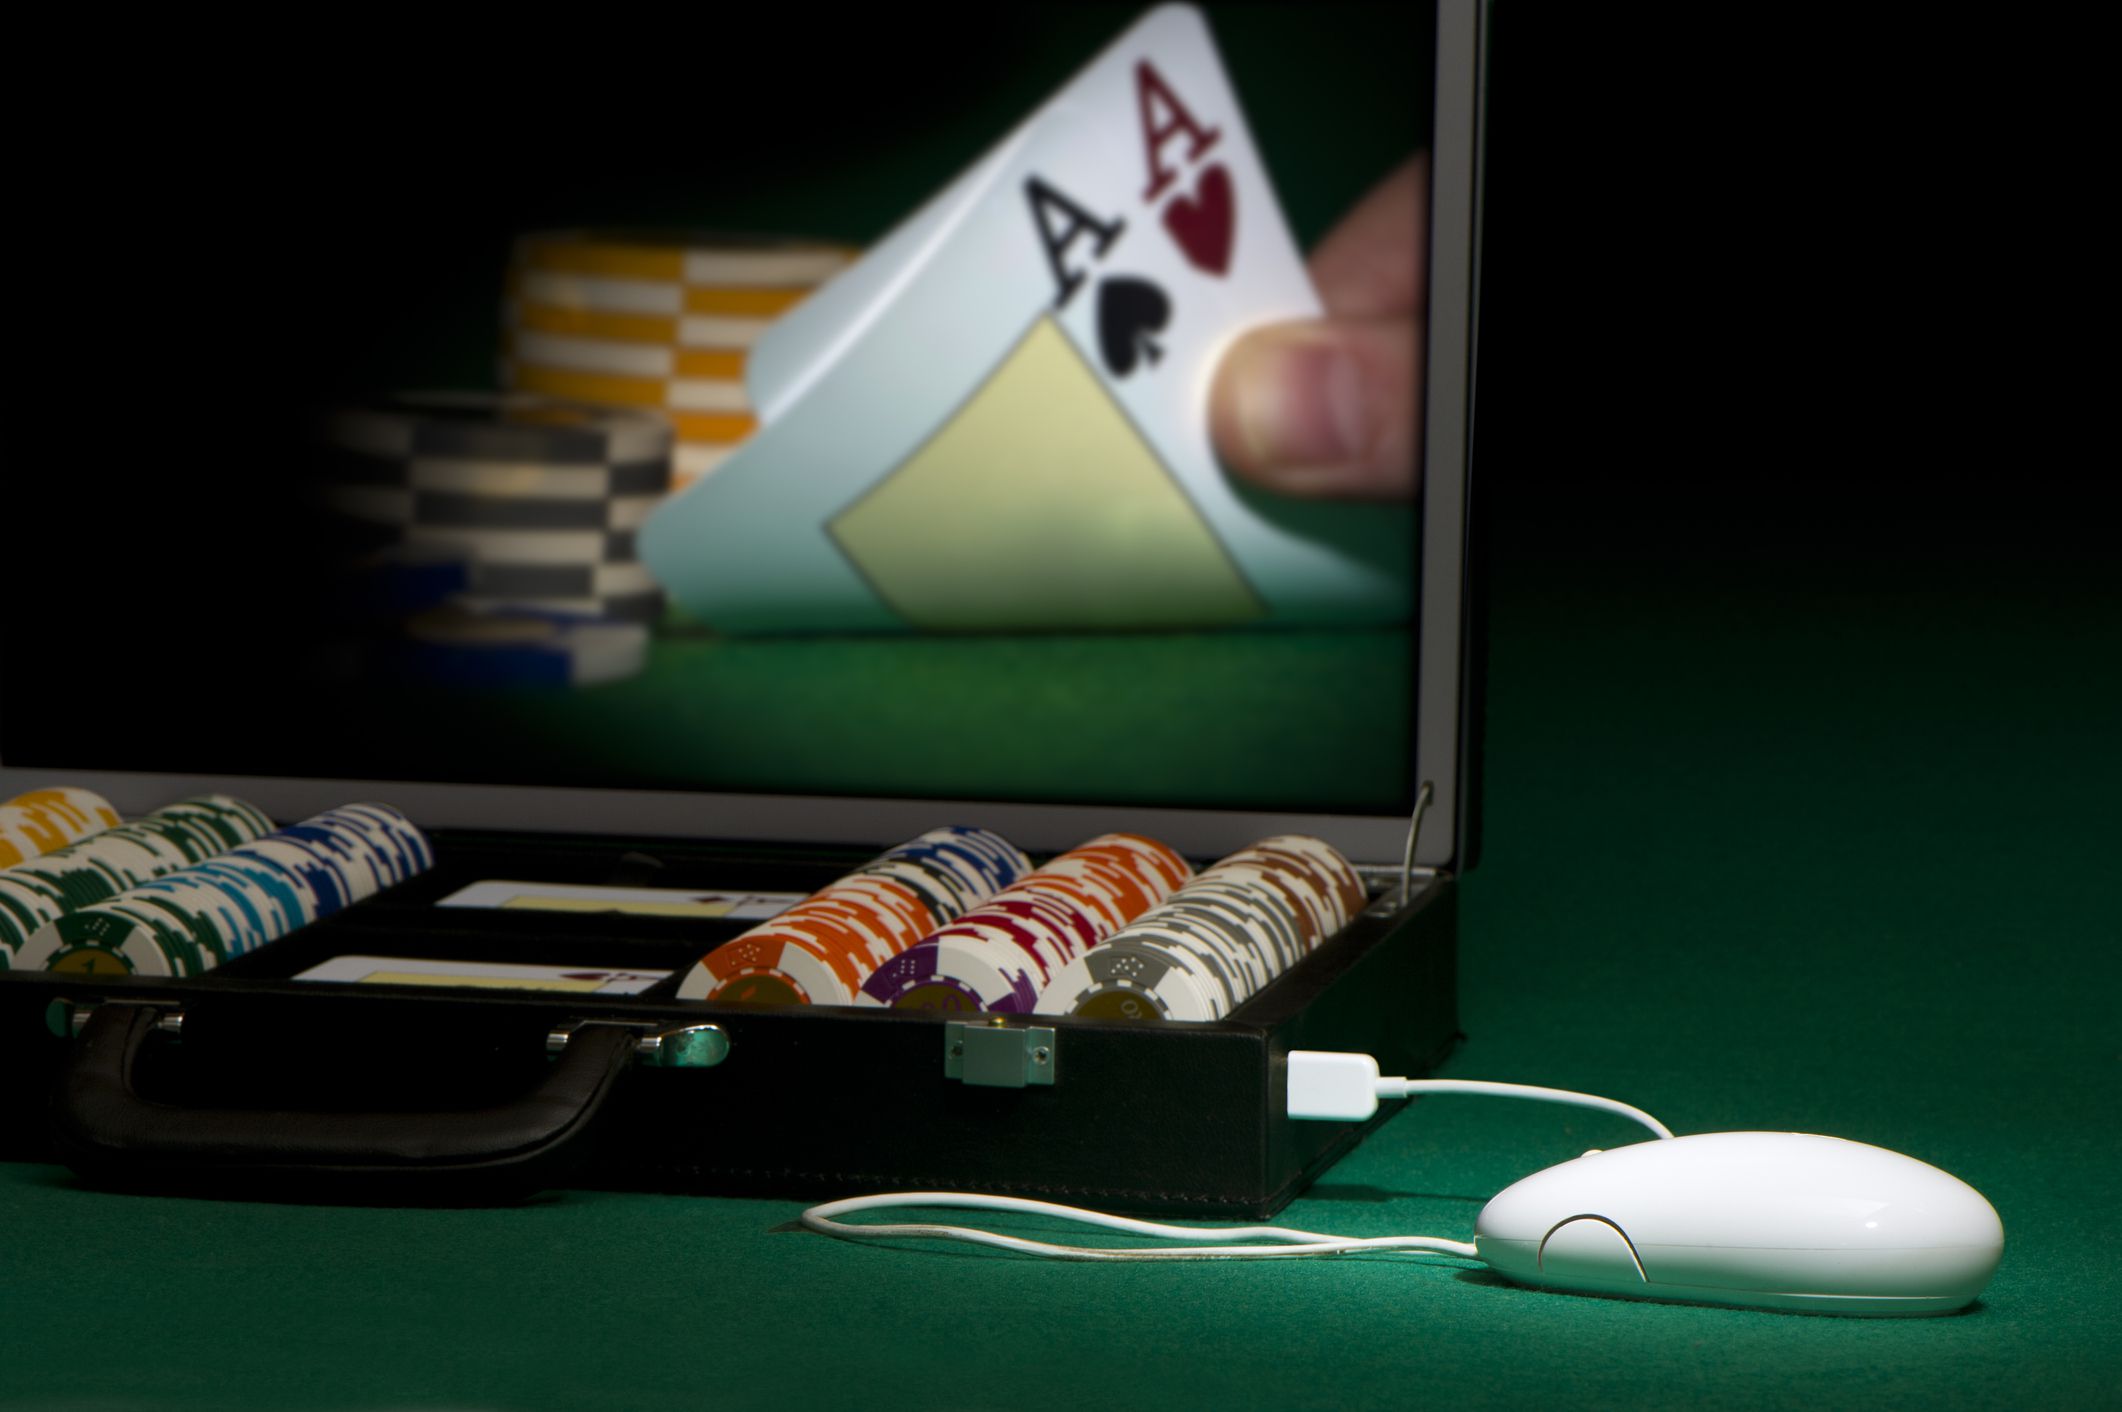 7 Popular Myths Related to Online Casino Explained